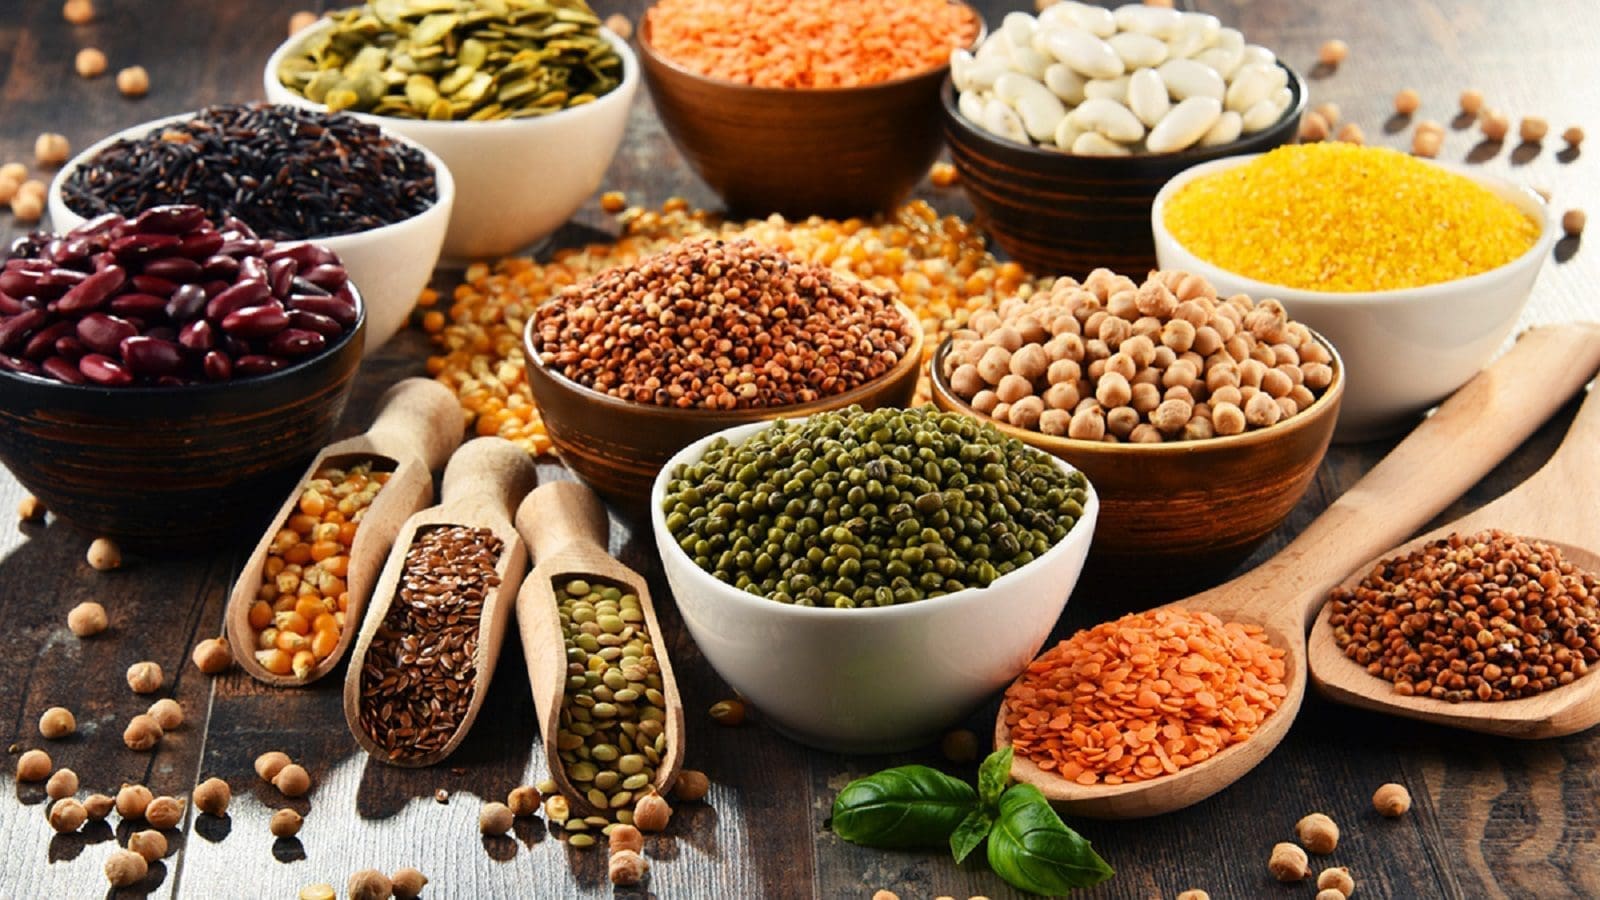 Ethiopia sets pricing policy to boost export revenues in pulses, oilseeds sector